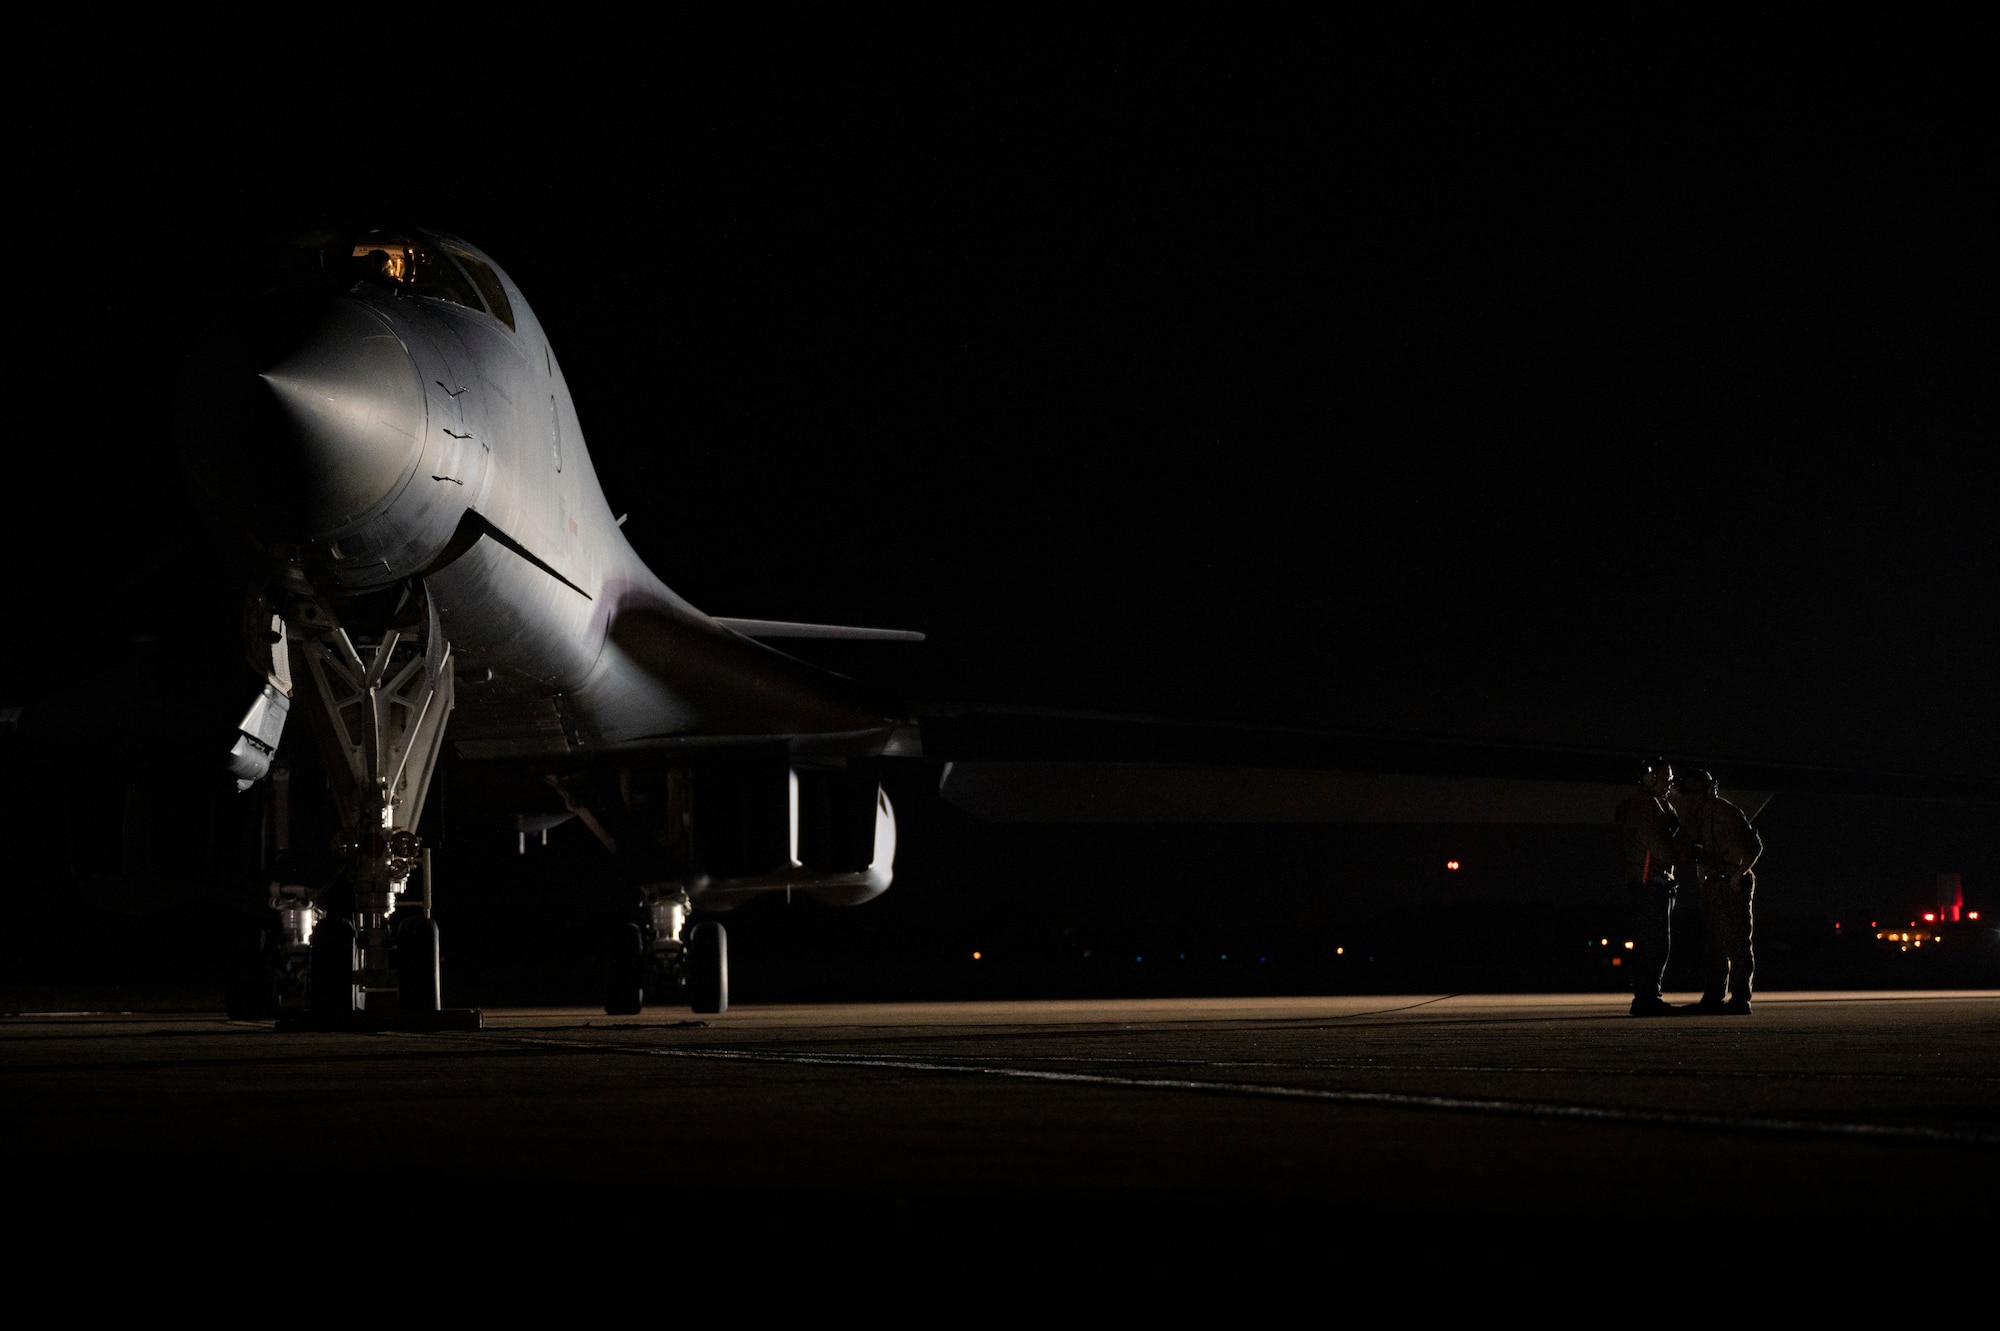 Two crew chiefs assigned to the 9th Expeditionary Bomb Squadron prepare a B-1B Lancer for take-off at Raf Fairford, United Kingdom, Oct. 11, 2021. Two B-1’s participated in a Bomber Task Force Europe training mission where the aircrews integrated with allied Joint Terminal Attack Controllers over Lithuania before conducting a hot pit refueling at Spangdahlem Air Base, Germany. (U.S. Air Force photo by Senior Airman Colin Hollowell)